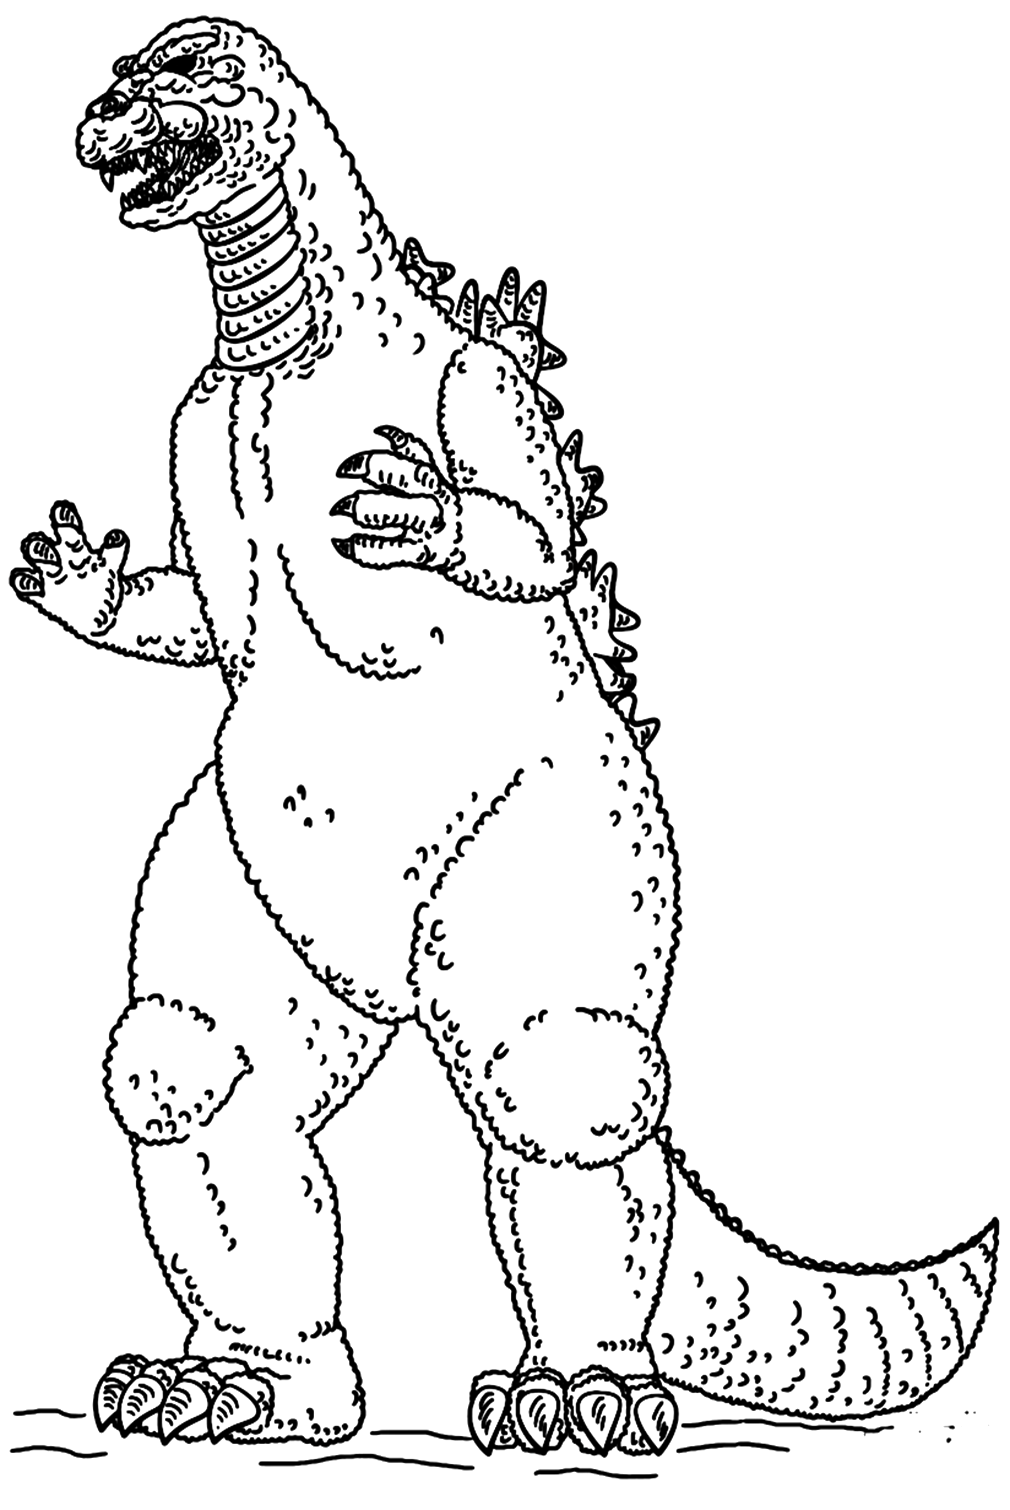 A Godzilla Coloring Pages